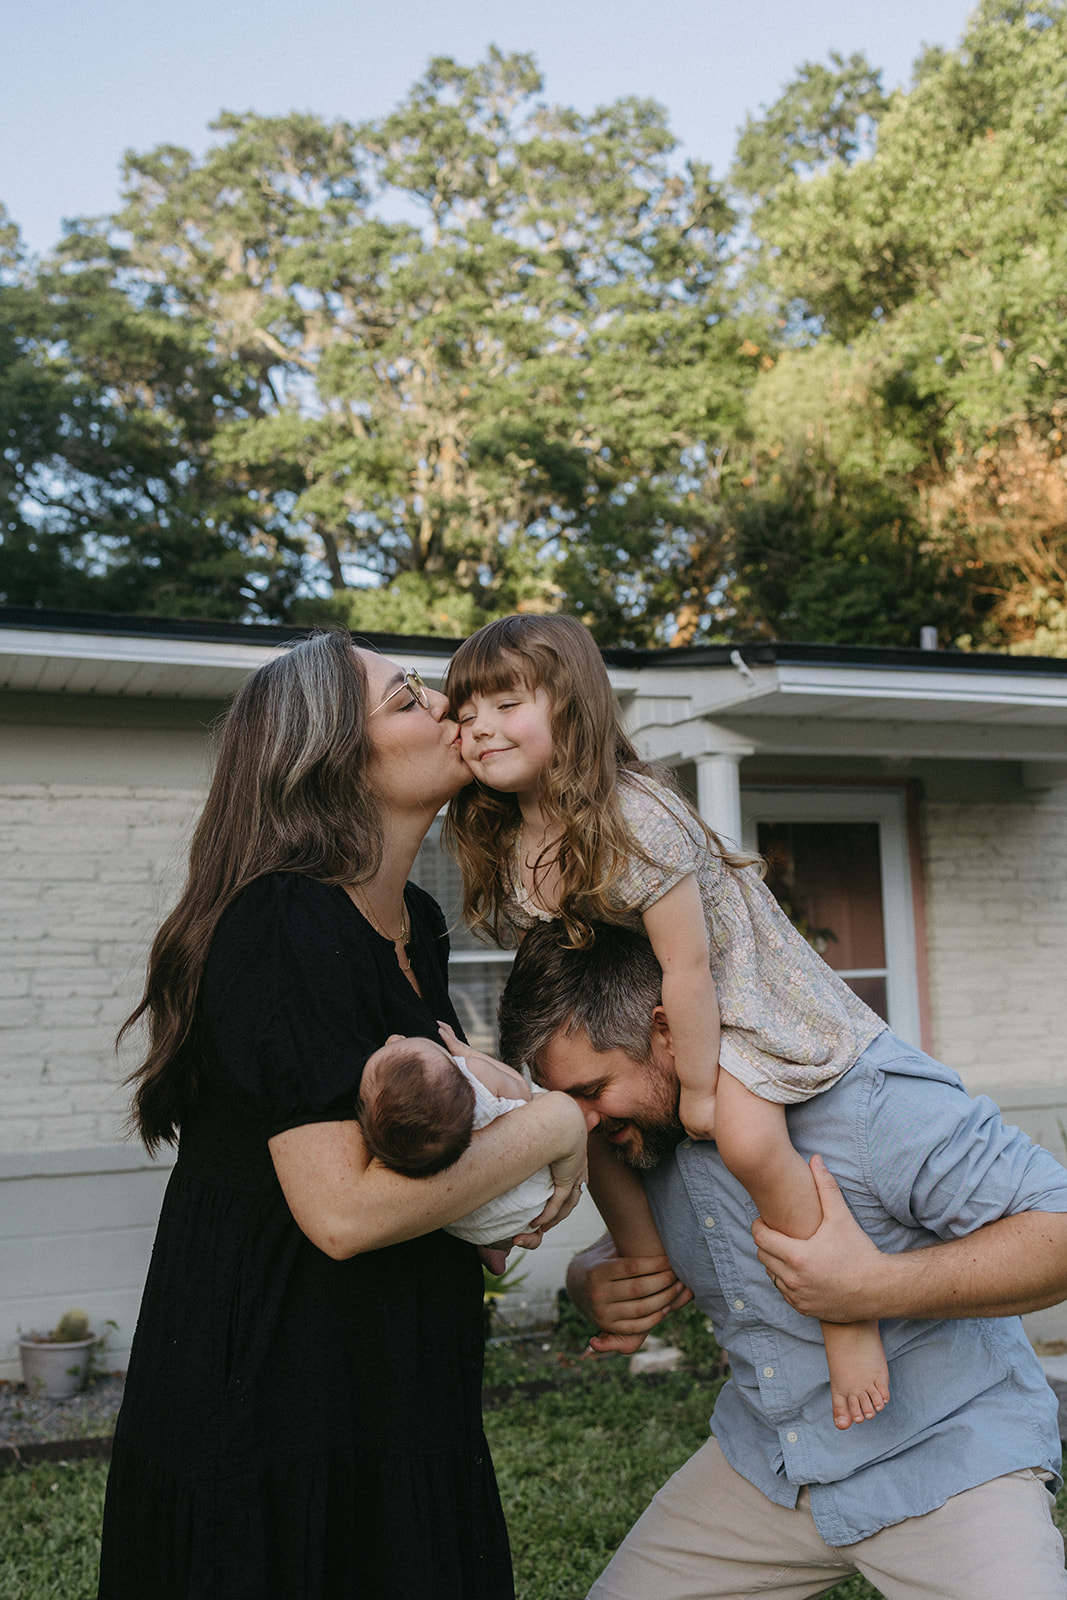 Family spending time outside together. Dad holding sibling on shoulders while mom holds newborn in arms. Mom gives kiss to daughter on the cheek.